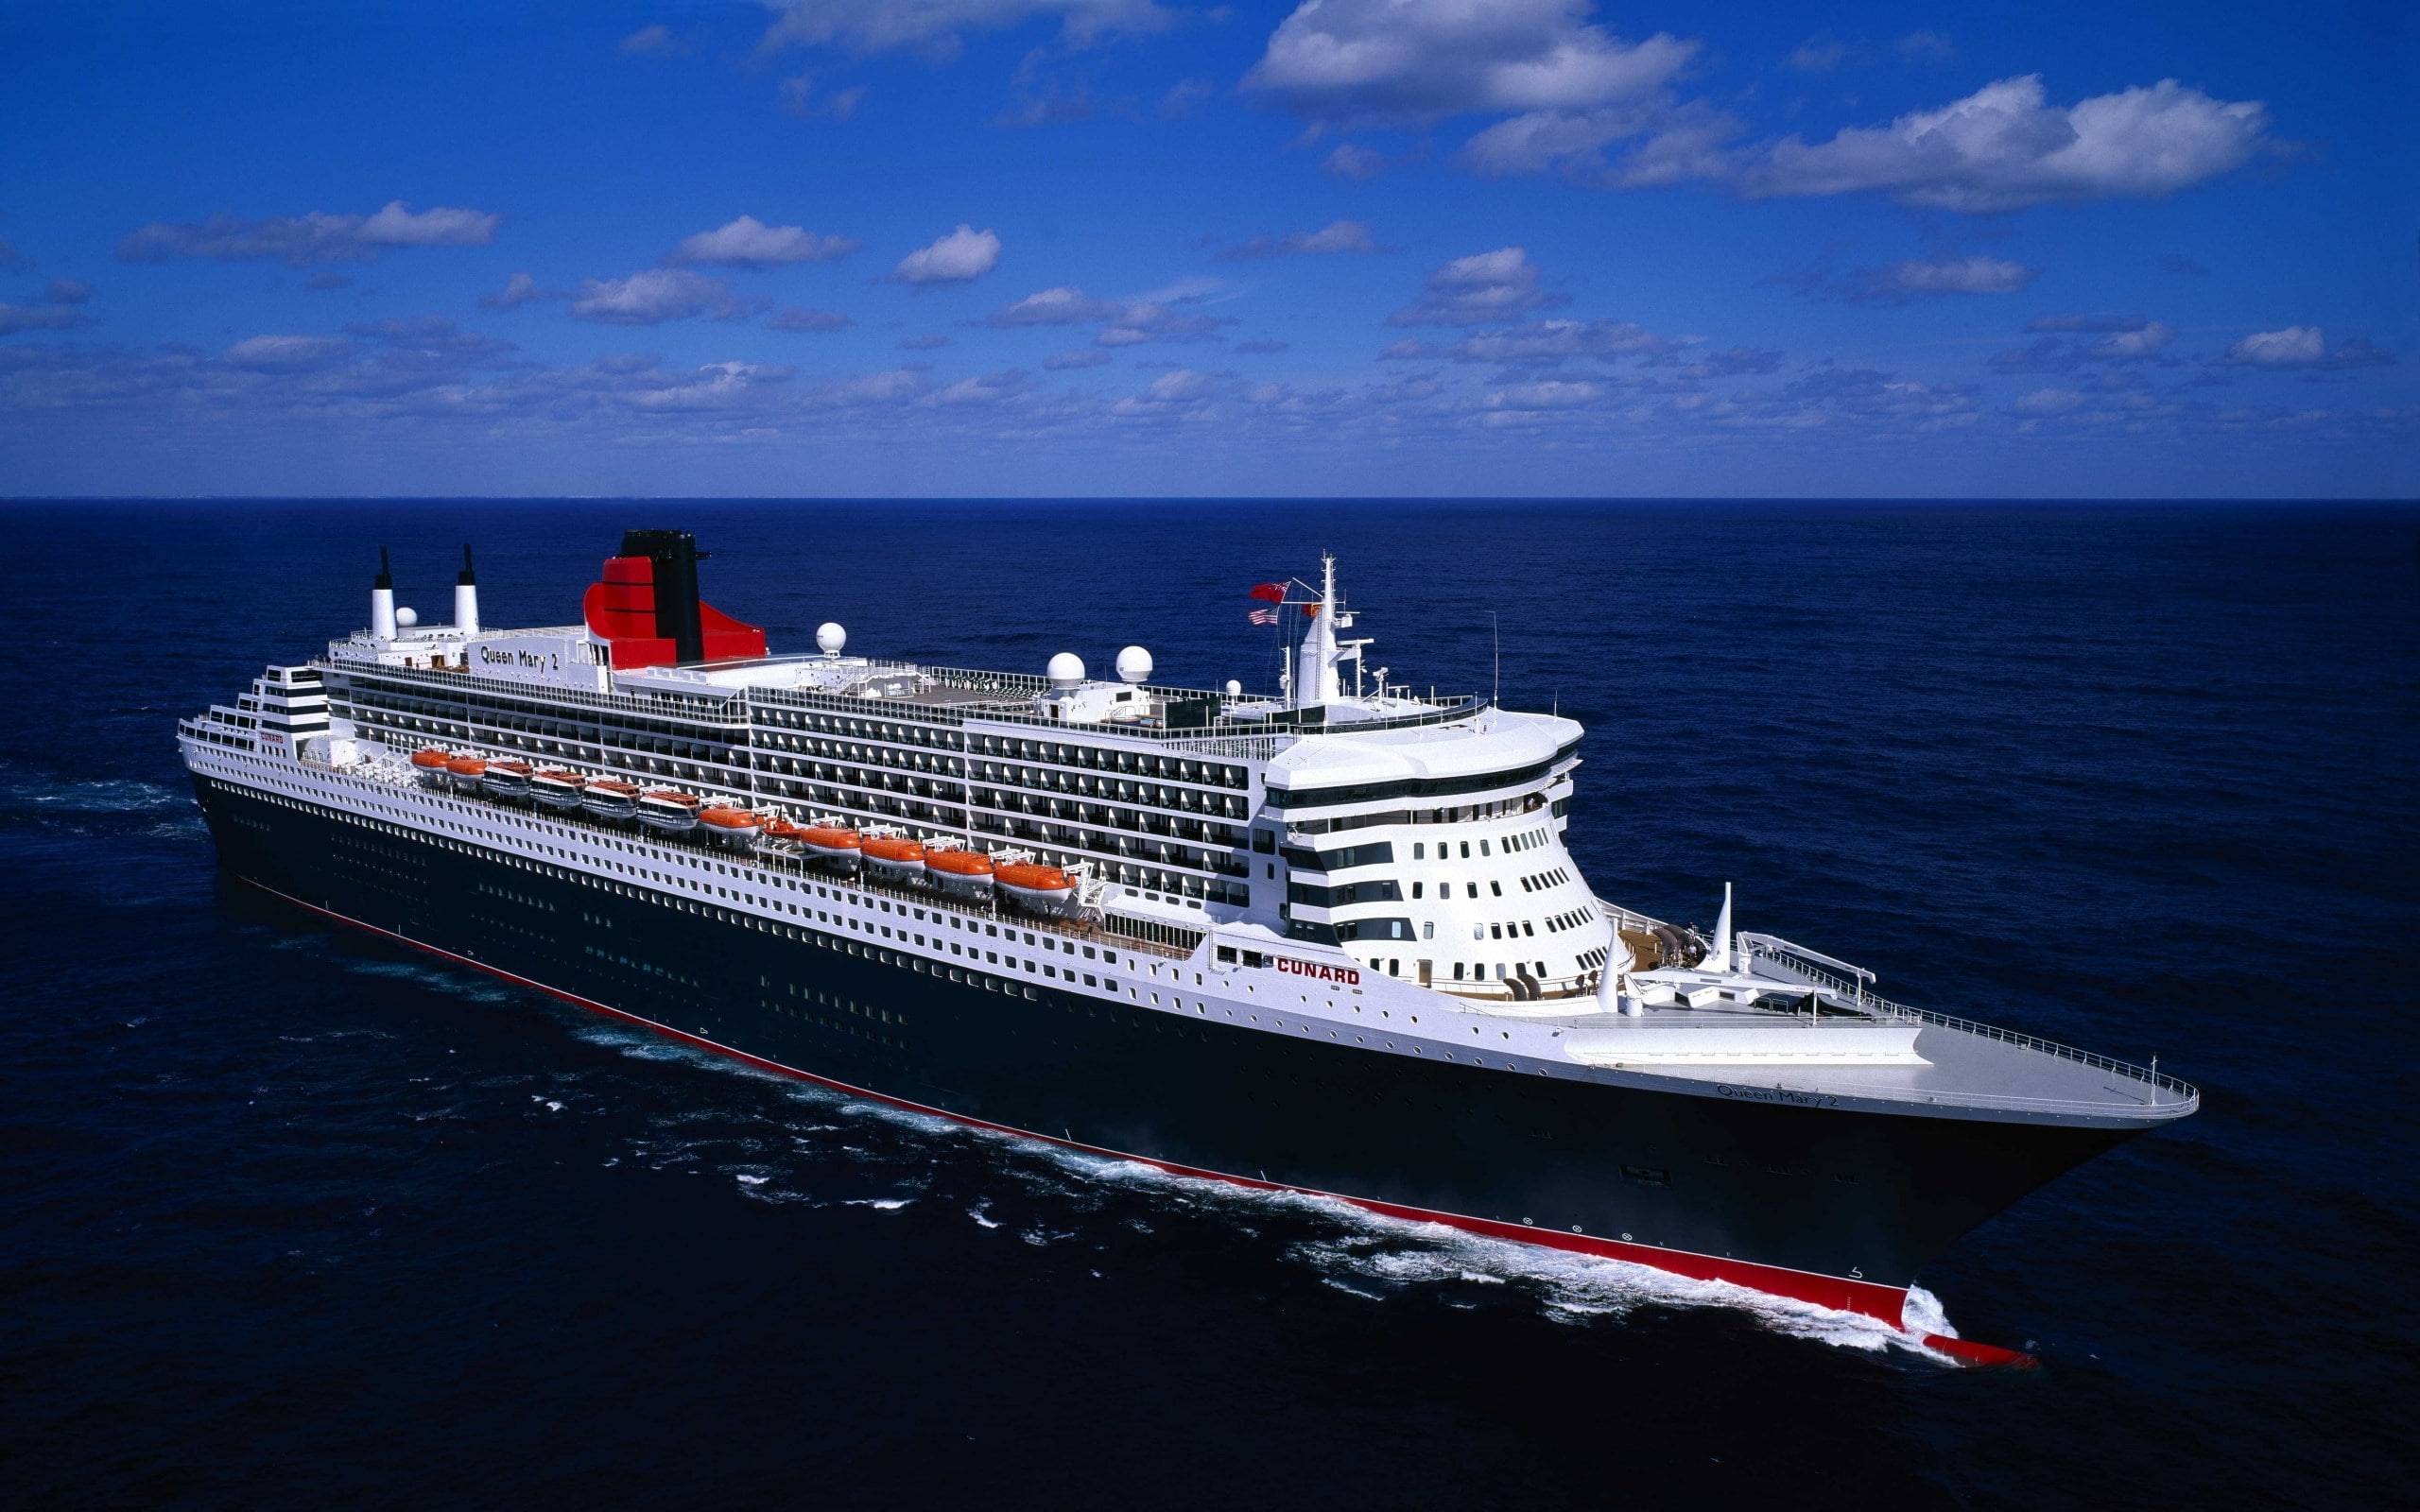 rms queen mary 2, nautical vessel, sea, water, transportation